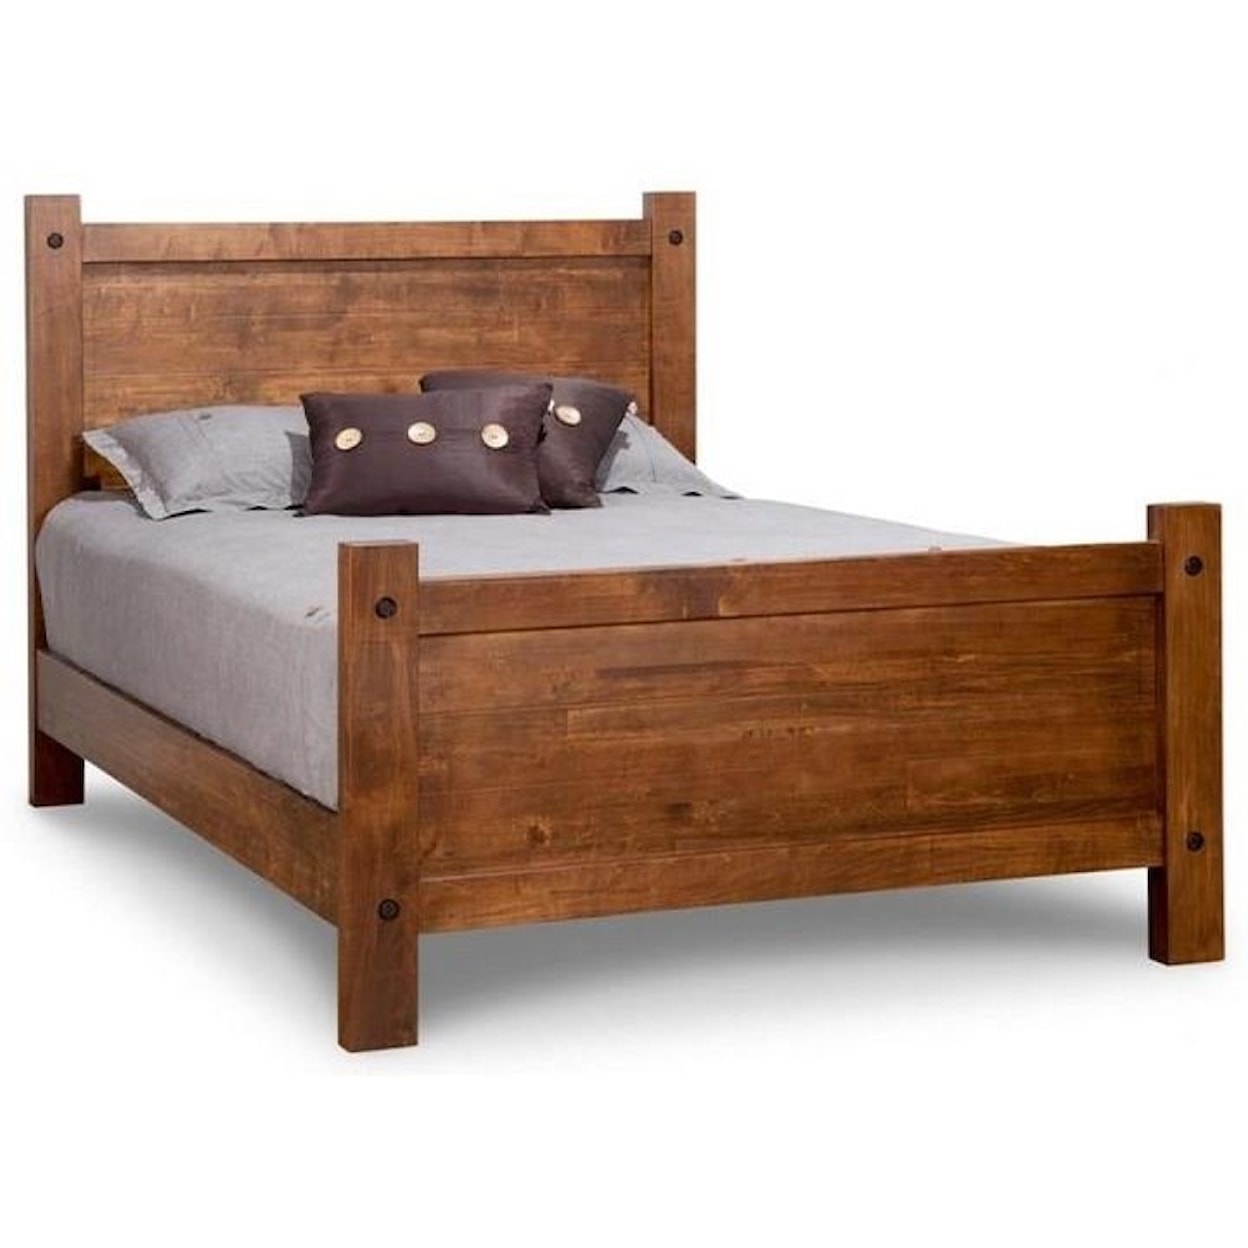 Handstone Rafters Full Bed